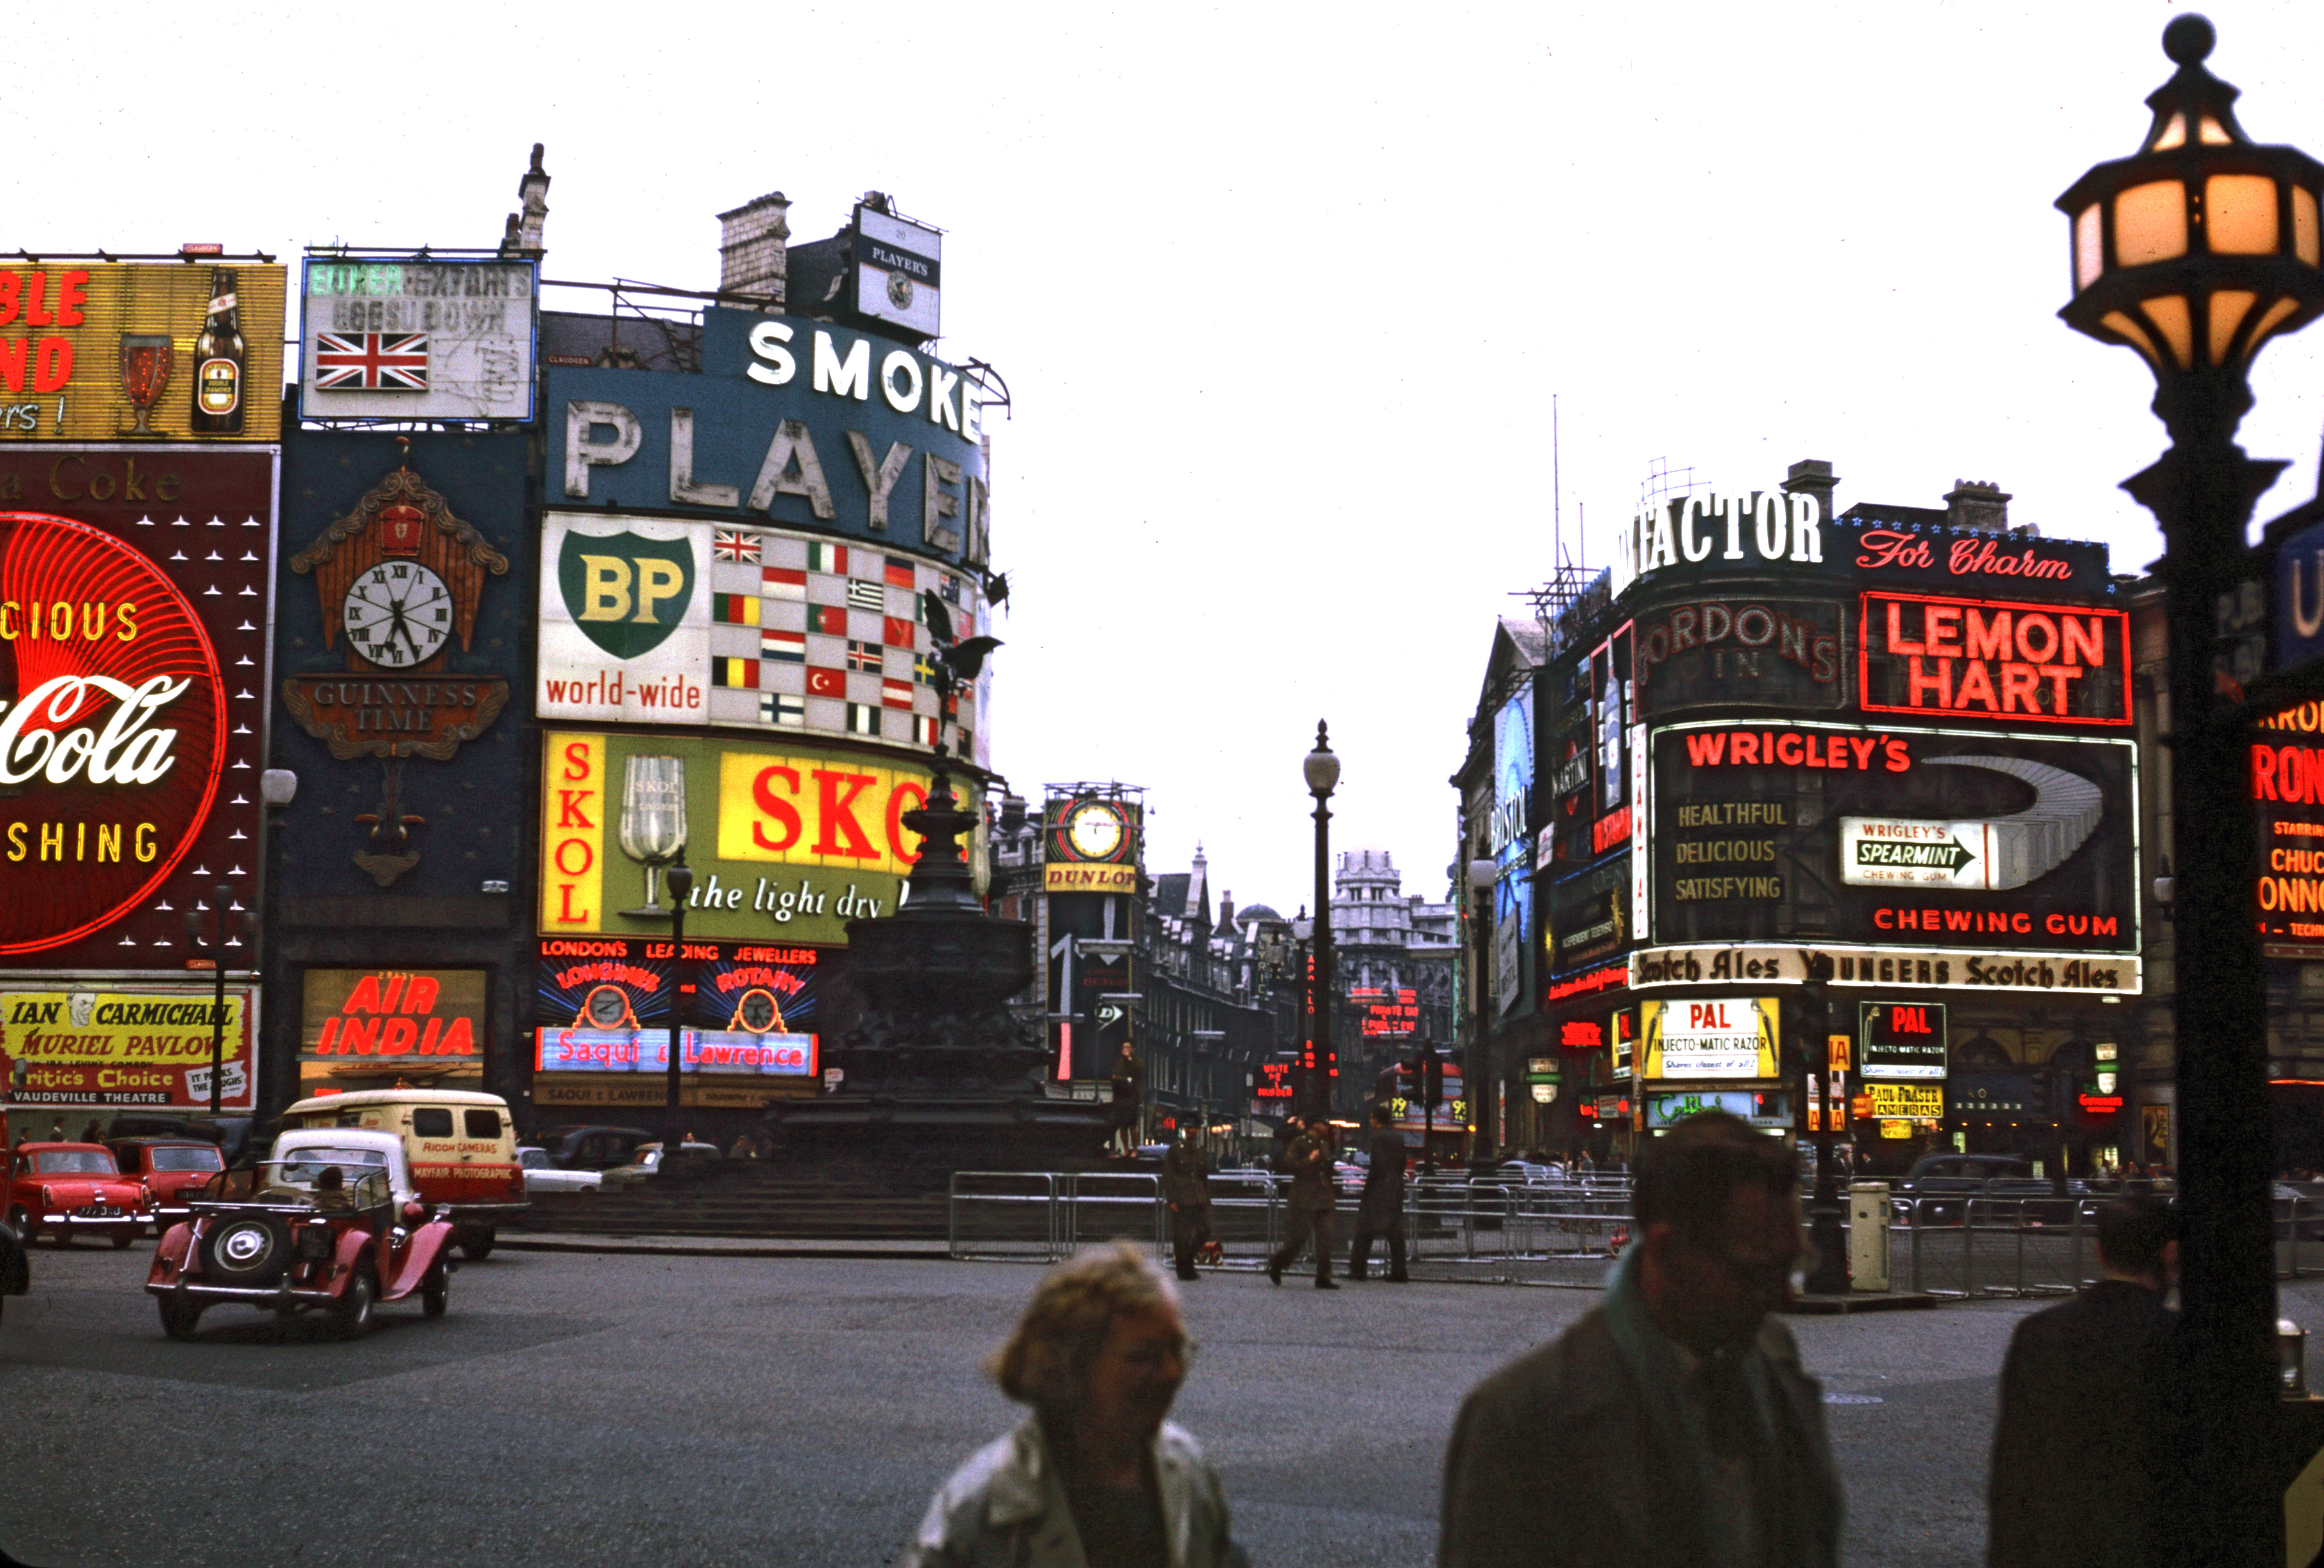 Piccadilly_Circus_in_London_1962_Brighter